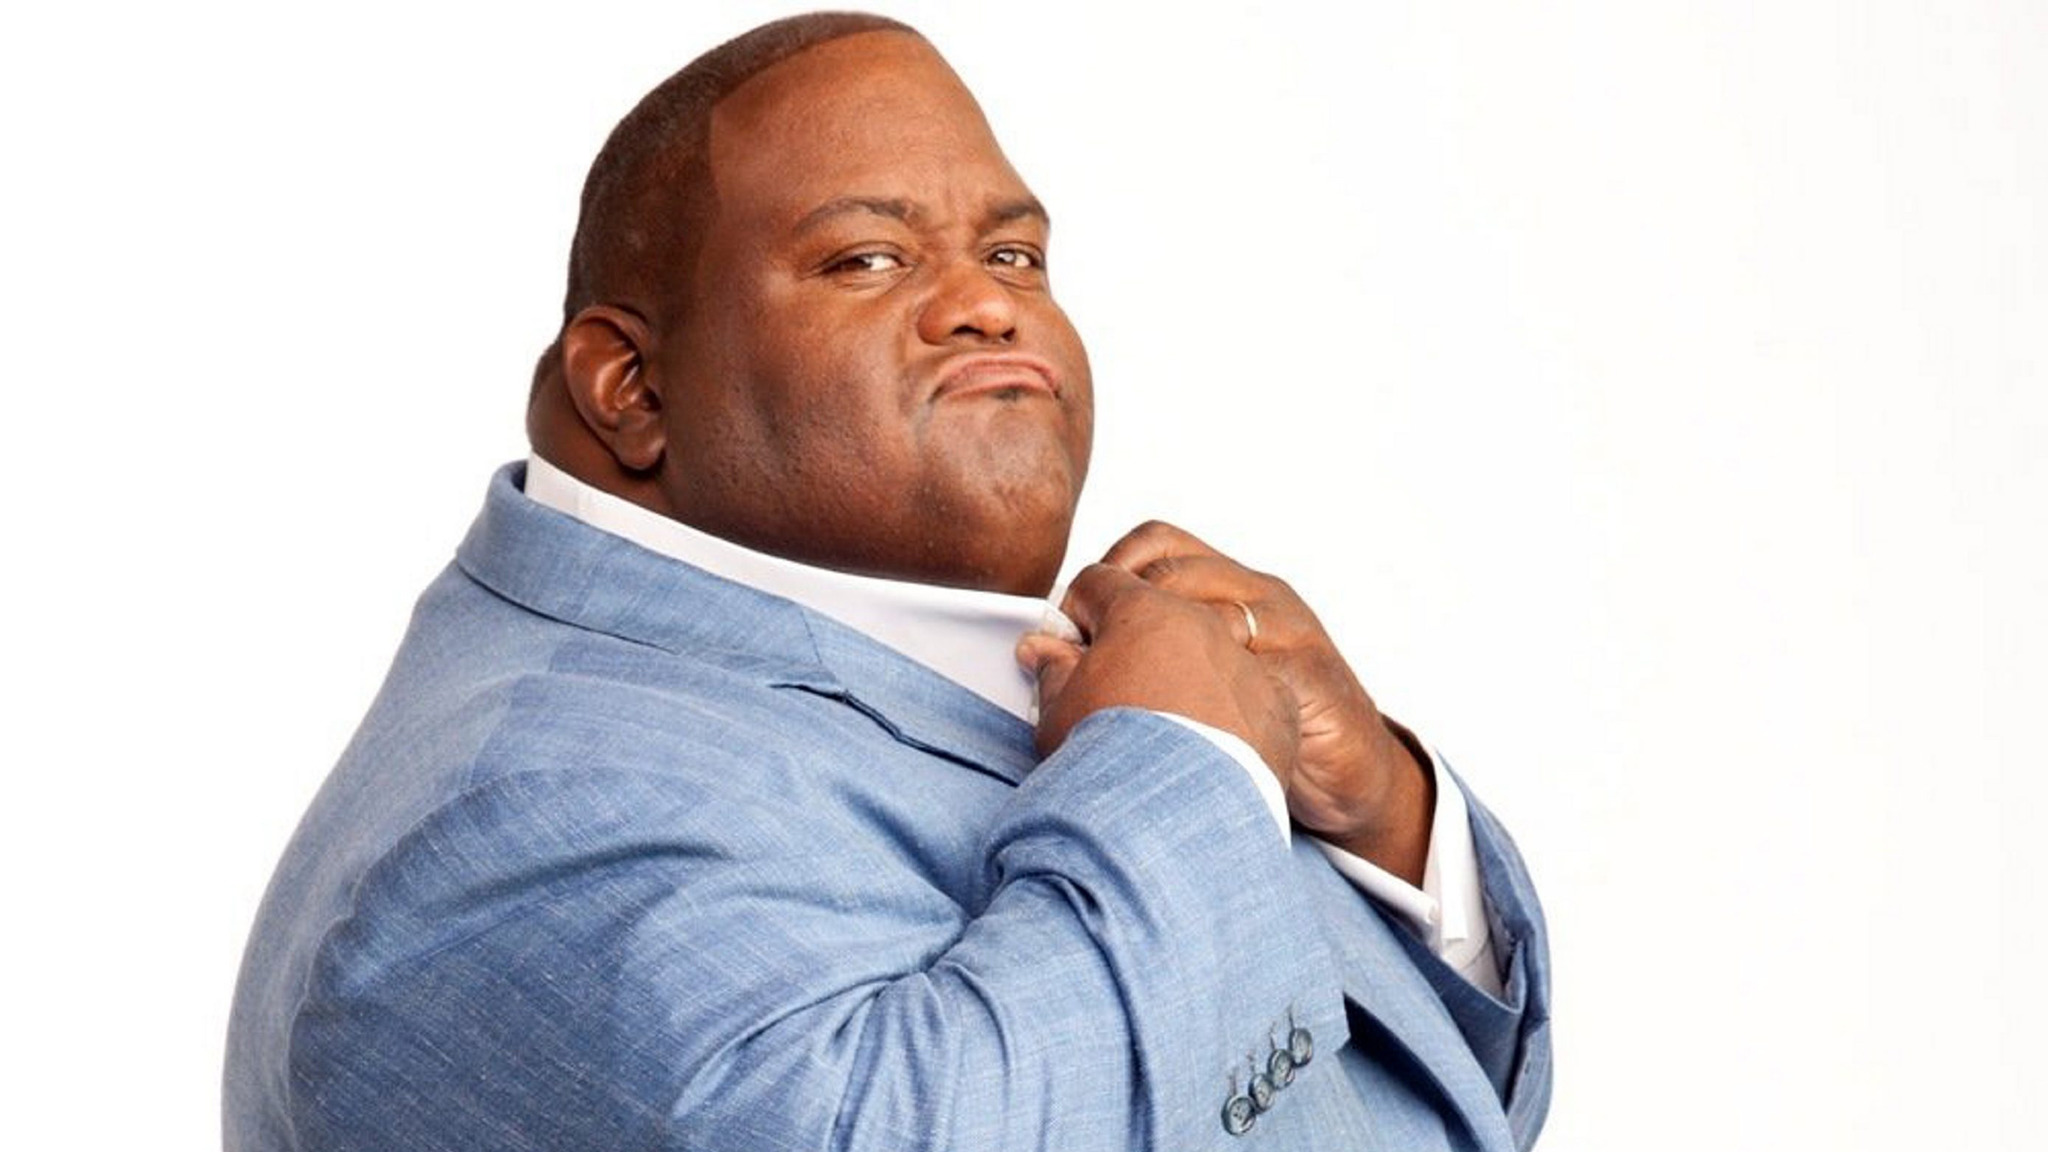 Lavell Crawford Tickets Event Dates & Schedule